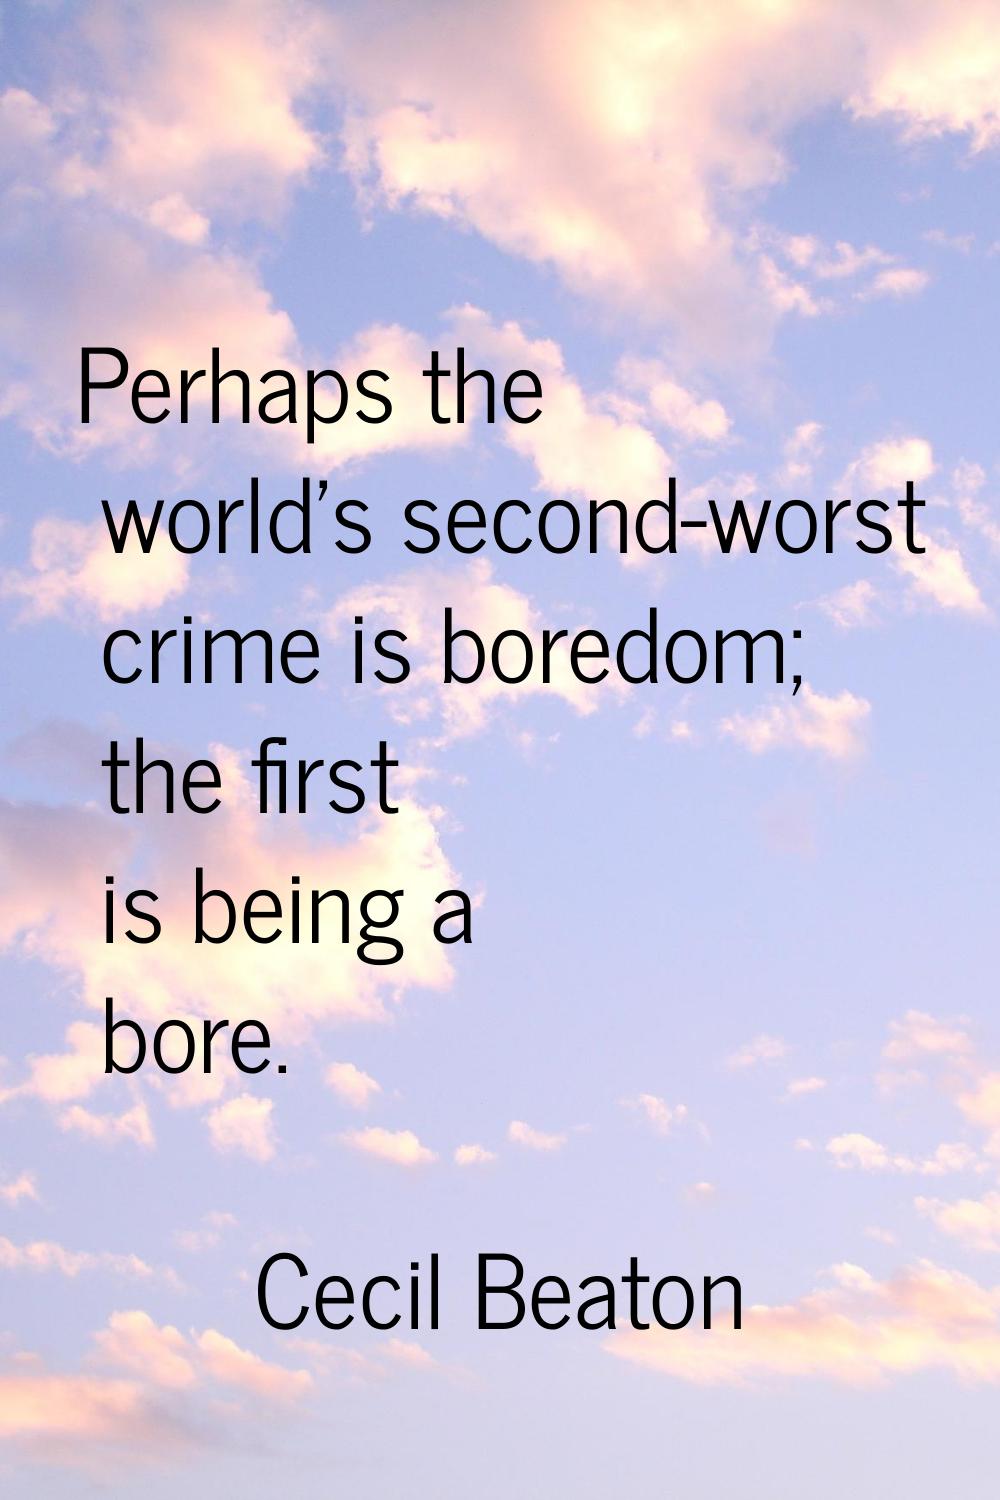 Perhaps the world's second-worst crime is boredom; the first is being a bore.